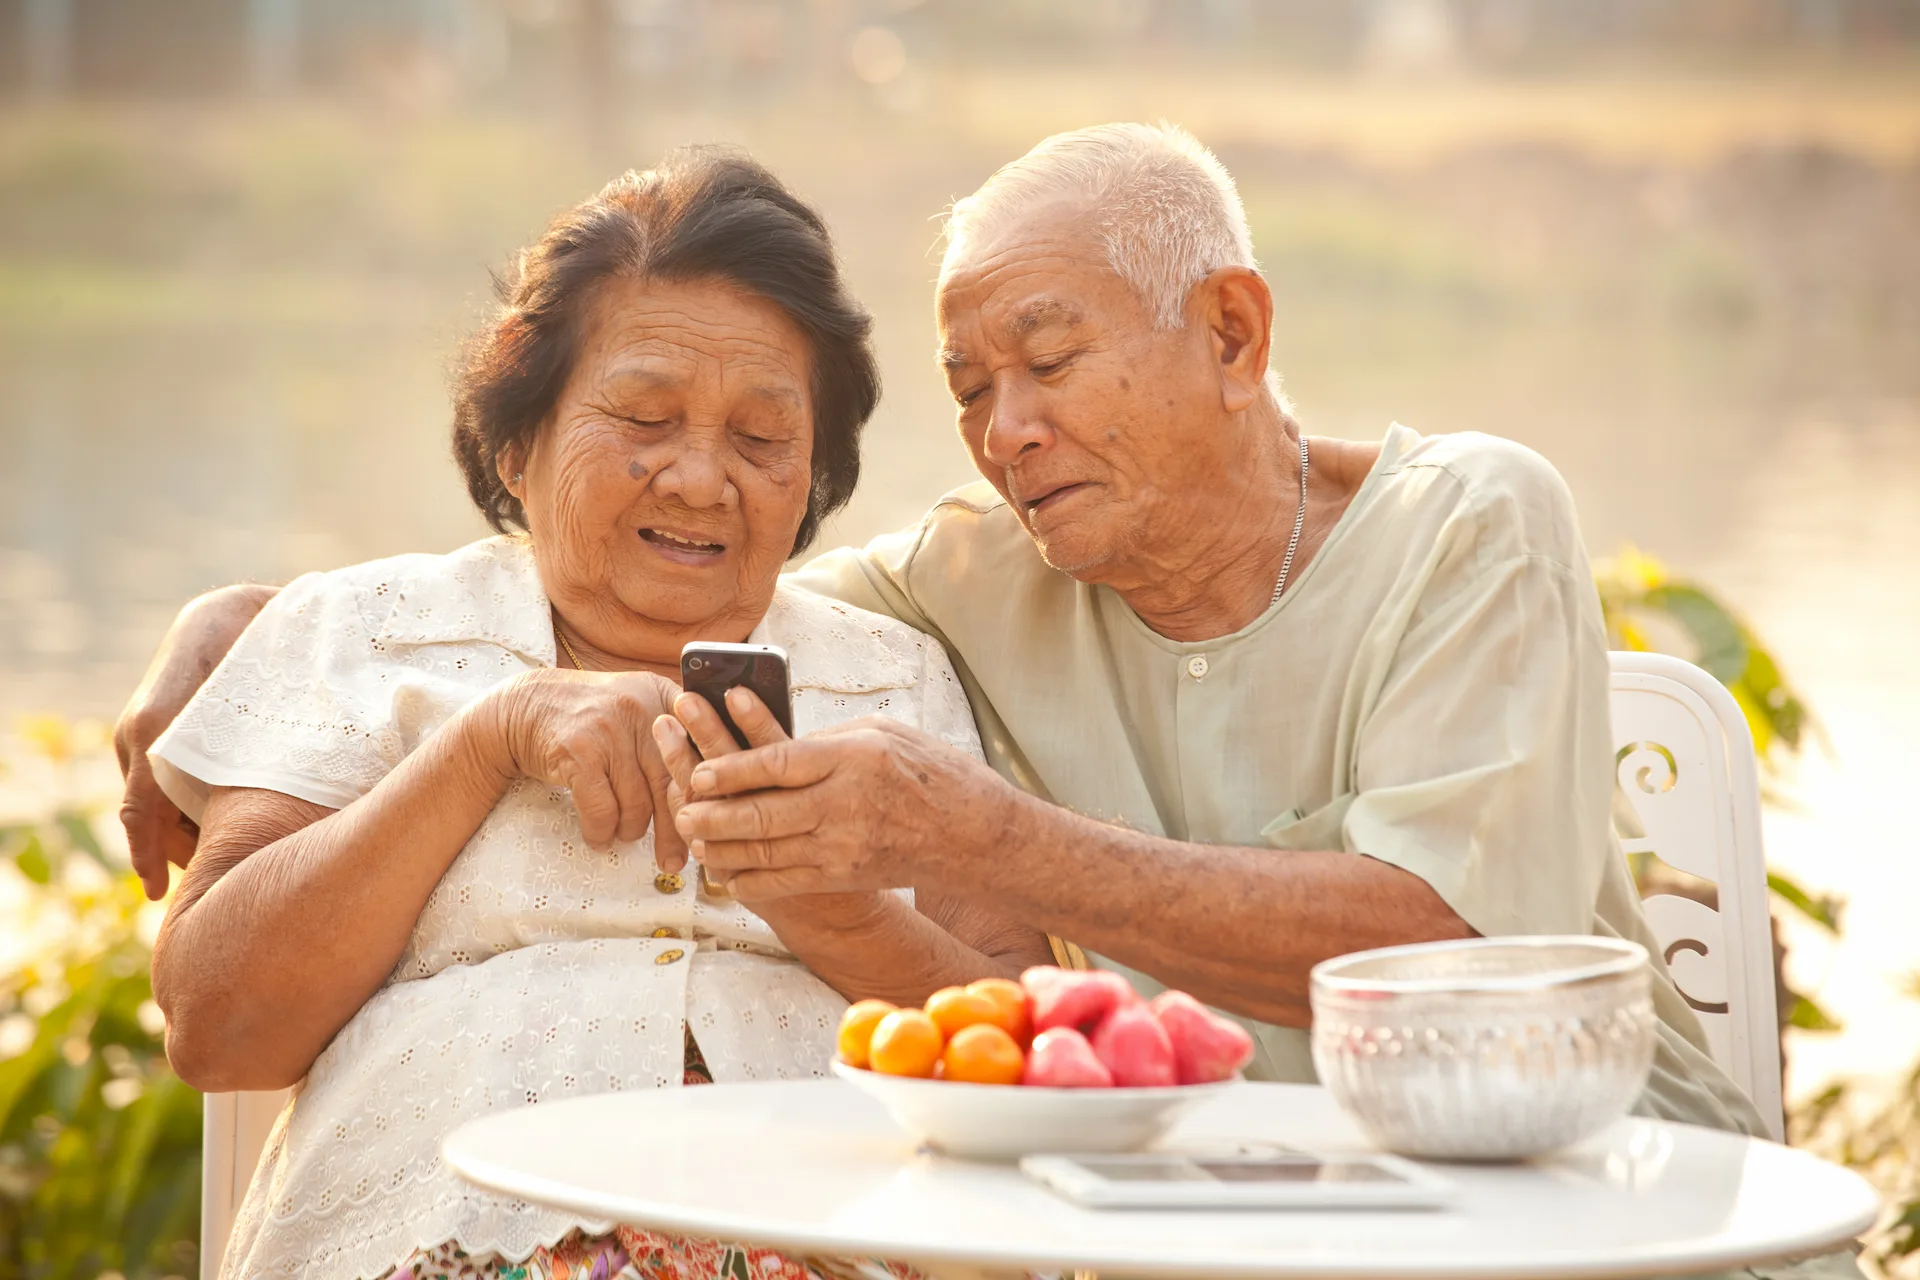 An elderly couple looks at a smartphone together while sitting at an outdoor table with fruit.